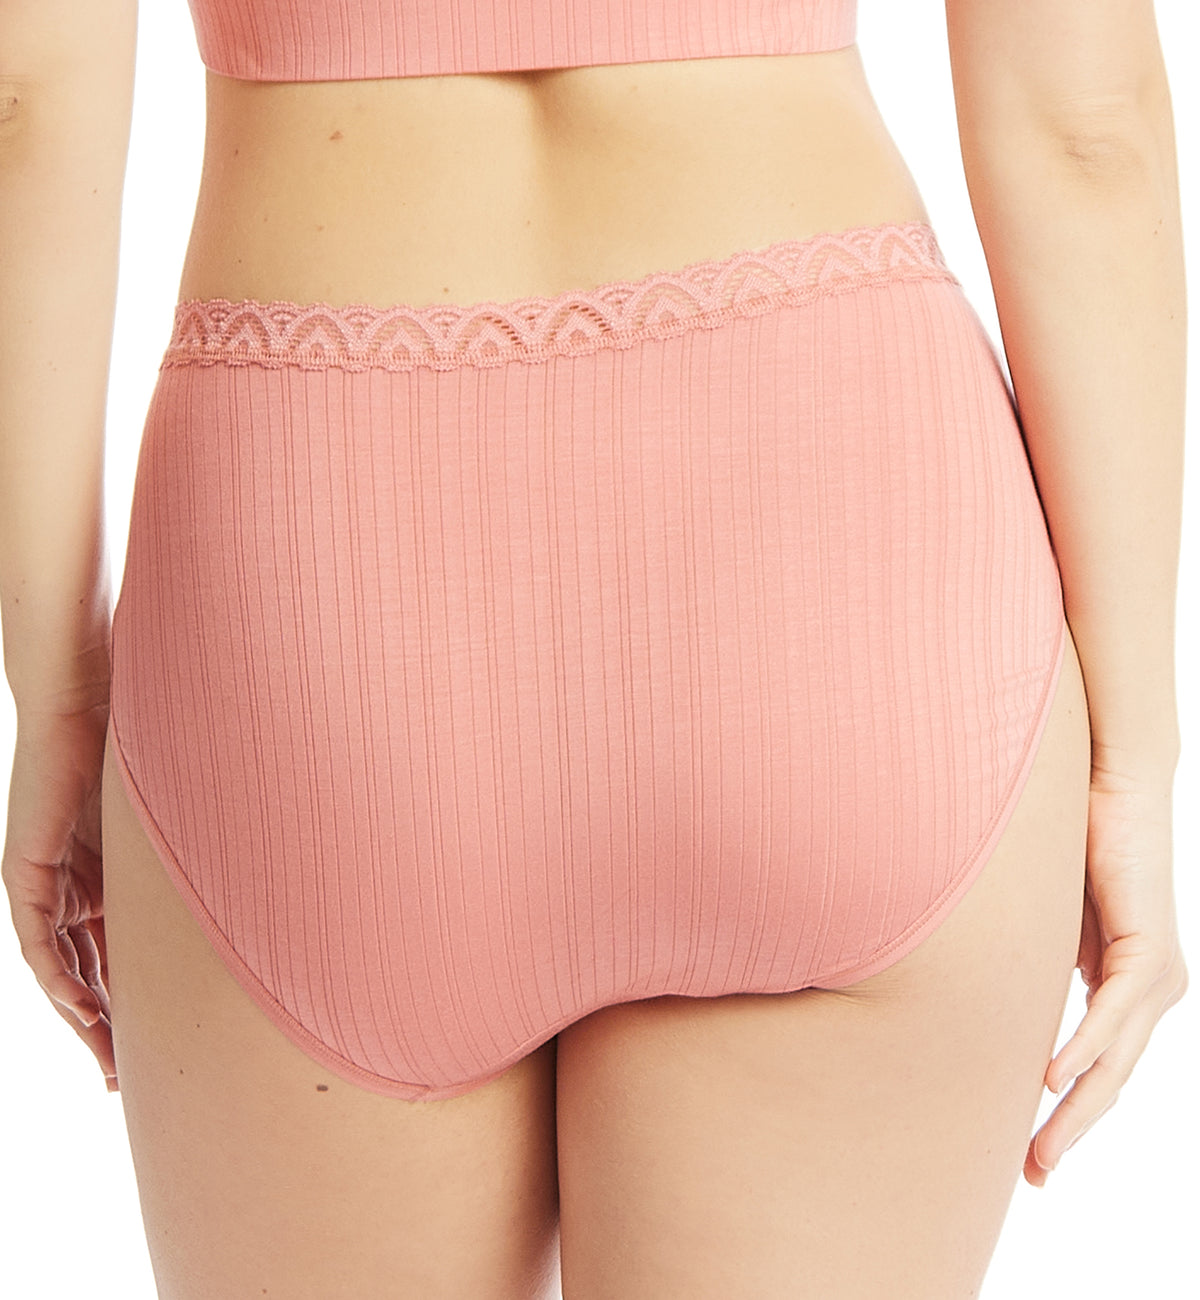 Hanky Panky MellowLuxe French Brief (624612),XS,Antique Rose - Antique Rose,XS